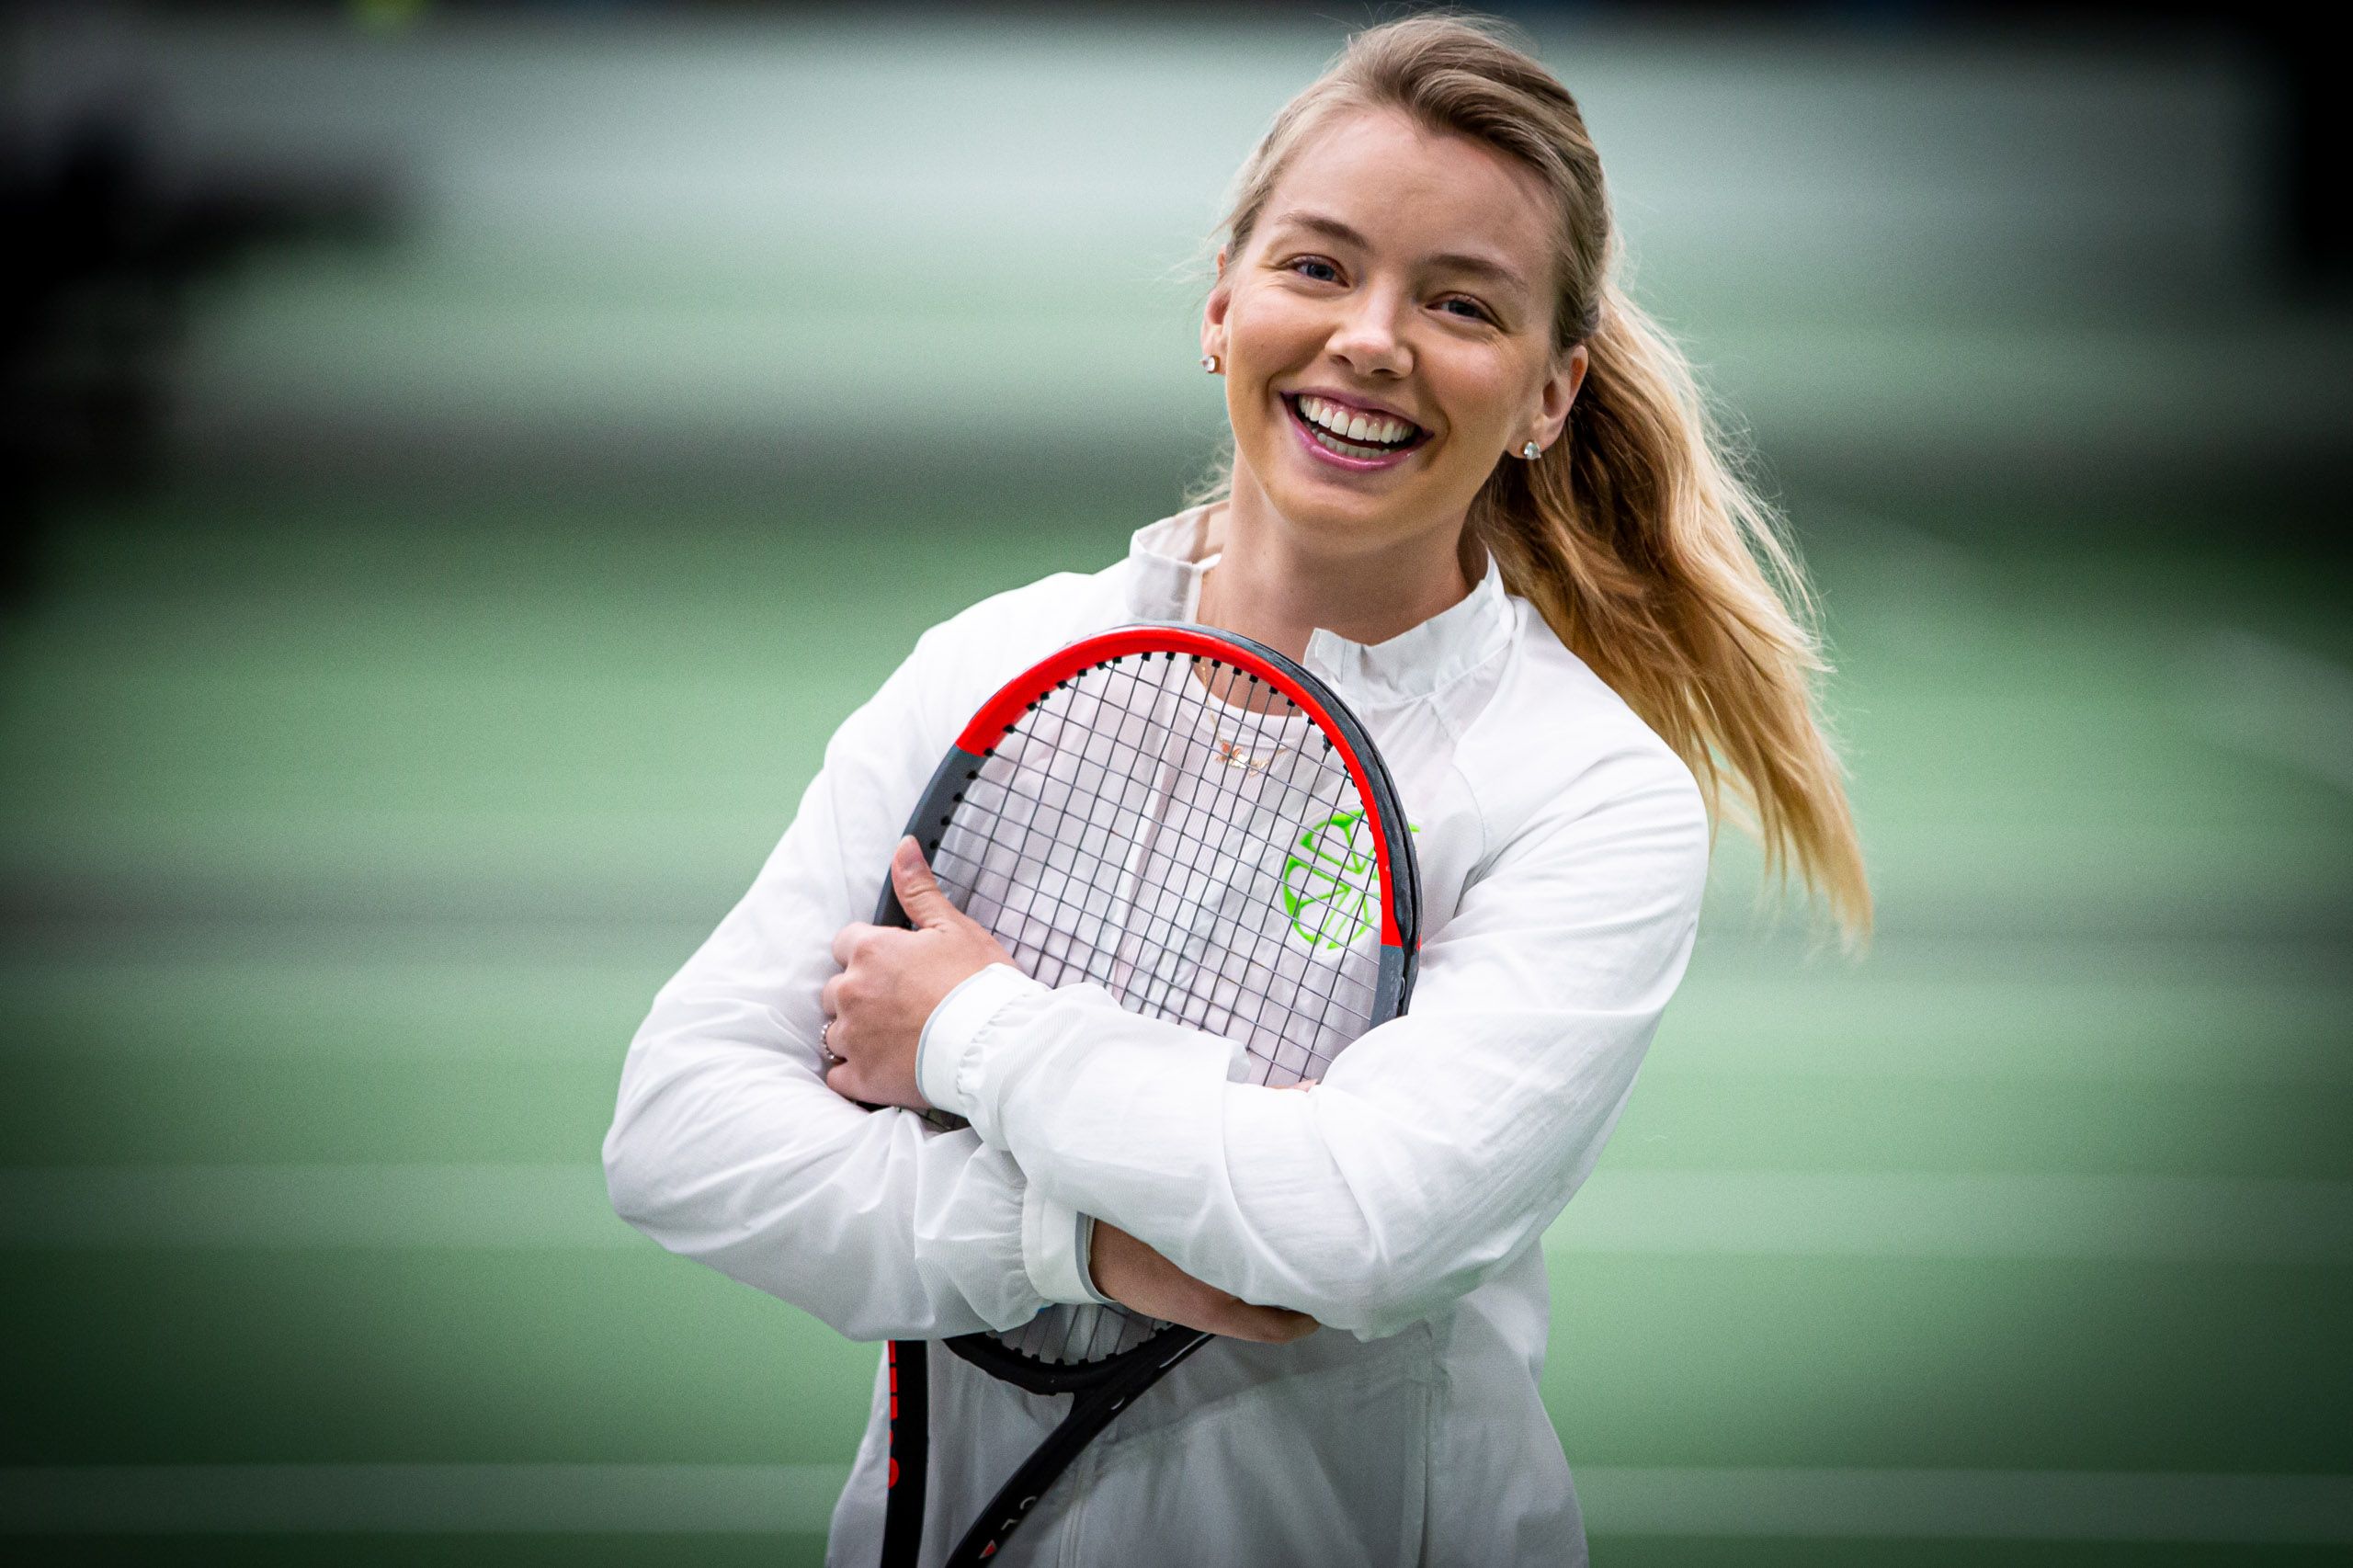 Woman Smiling with Tennis Racket